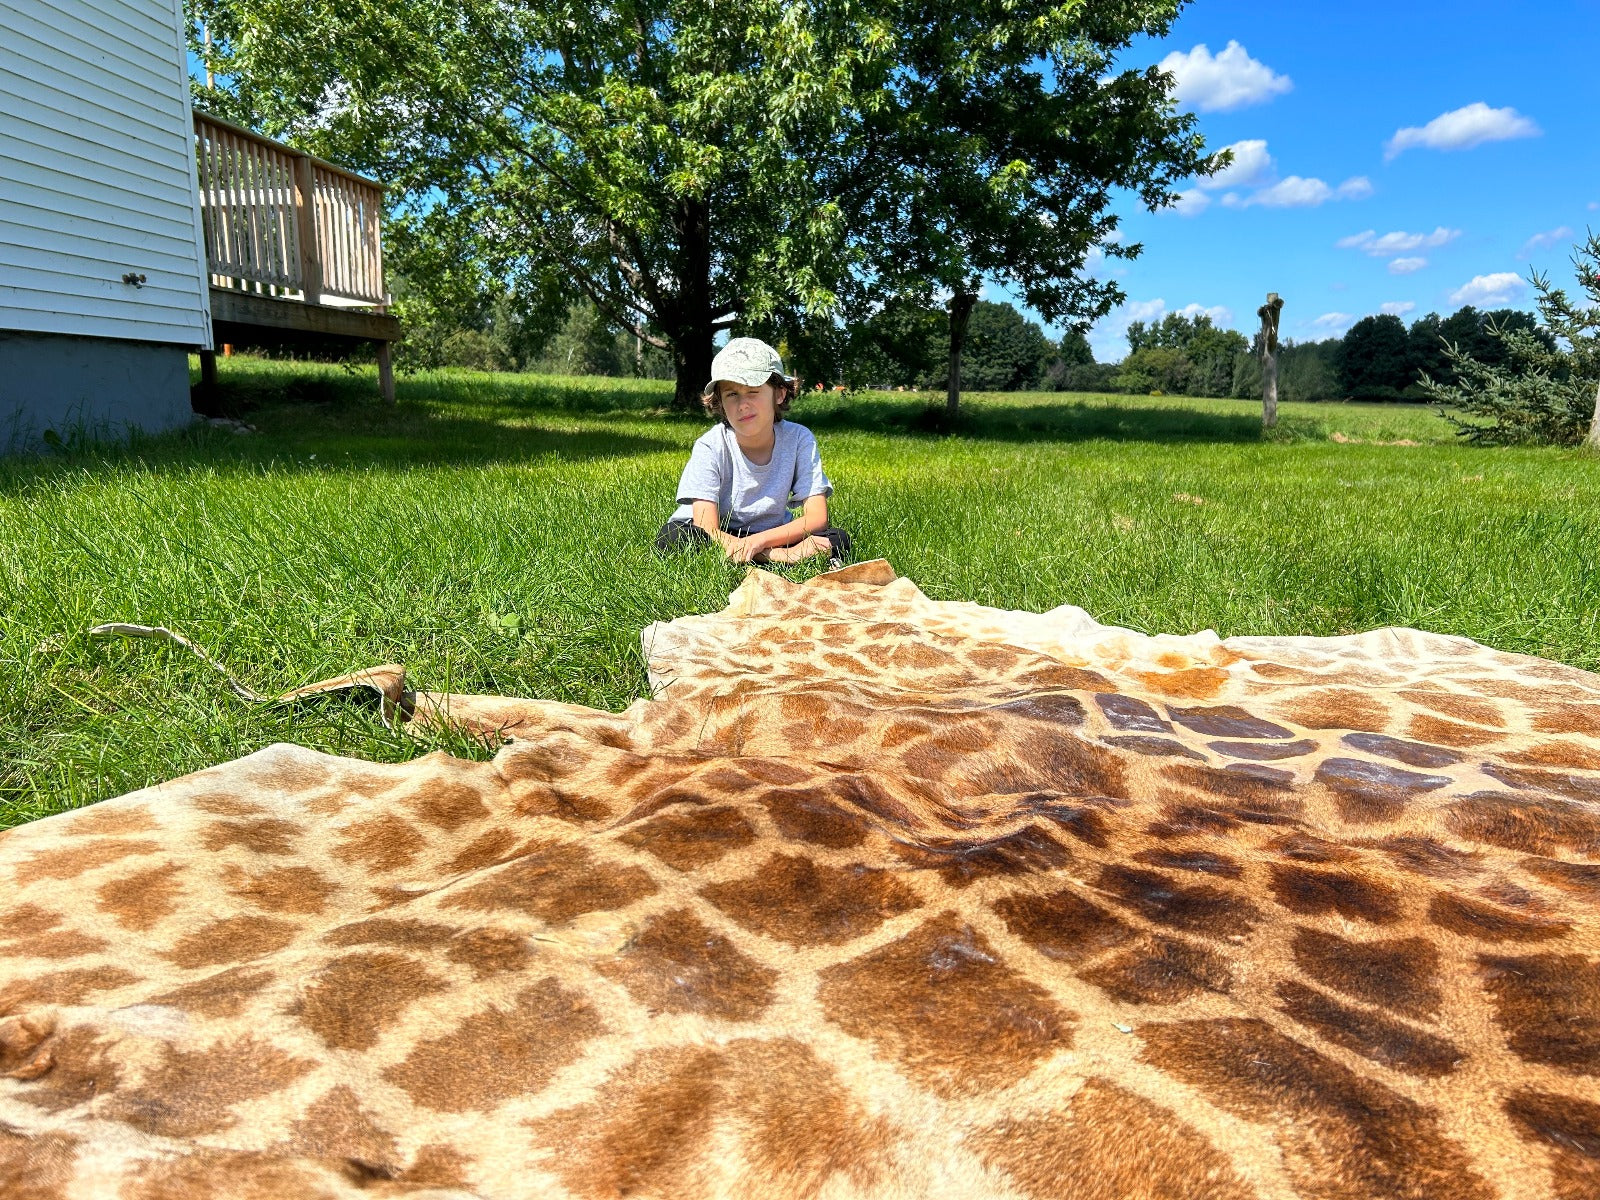 Real Giraffe Skin # 3 Body Size: 57X72 inch (excluding tail)